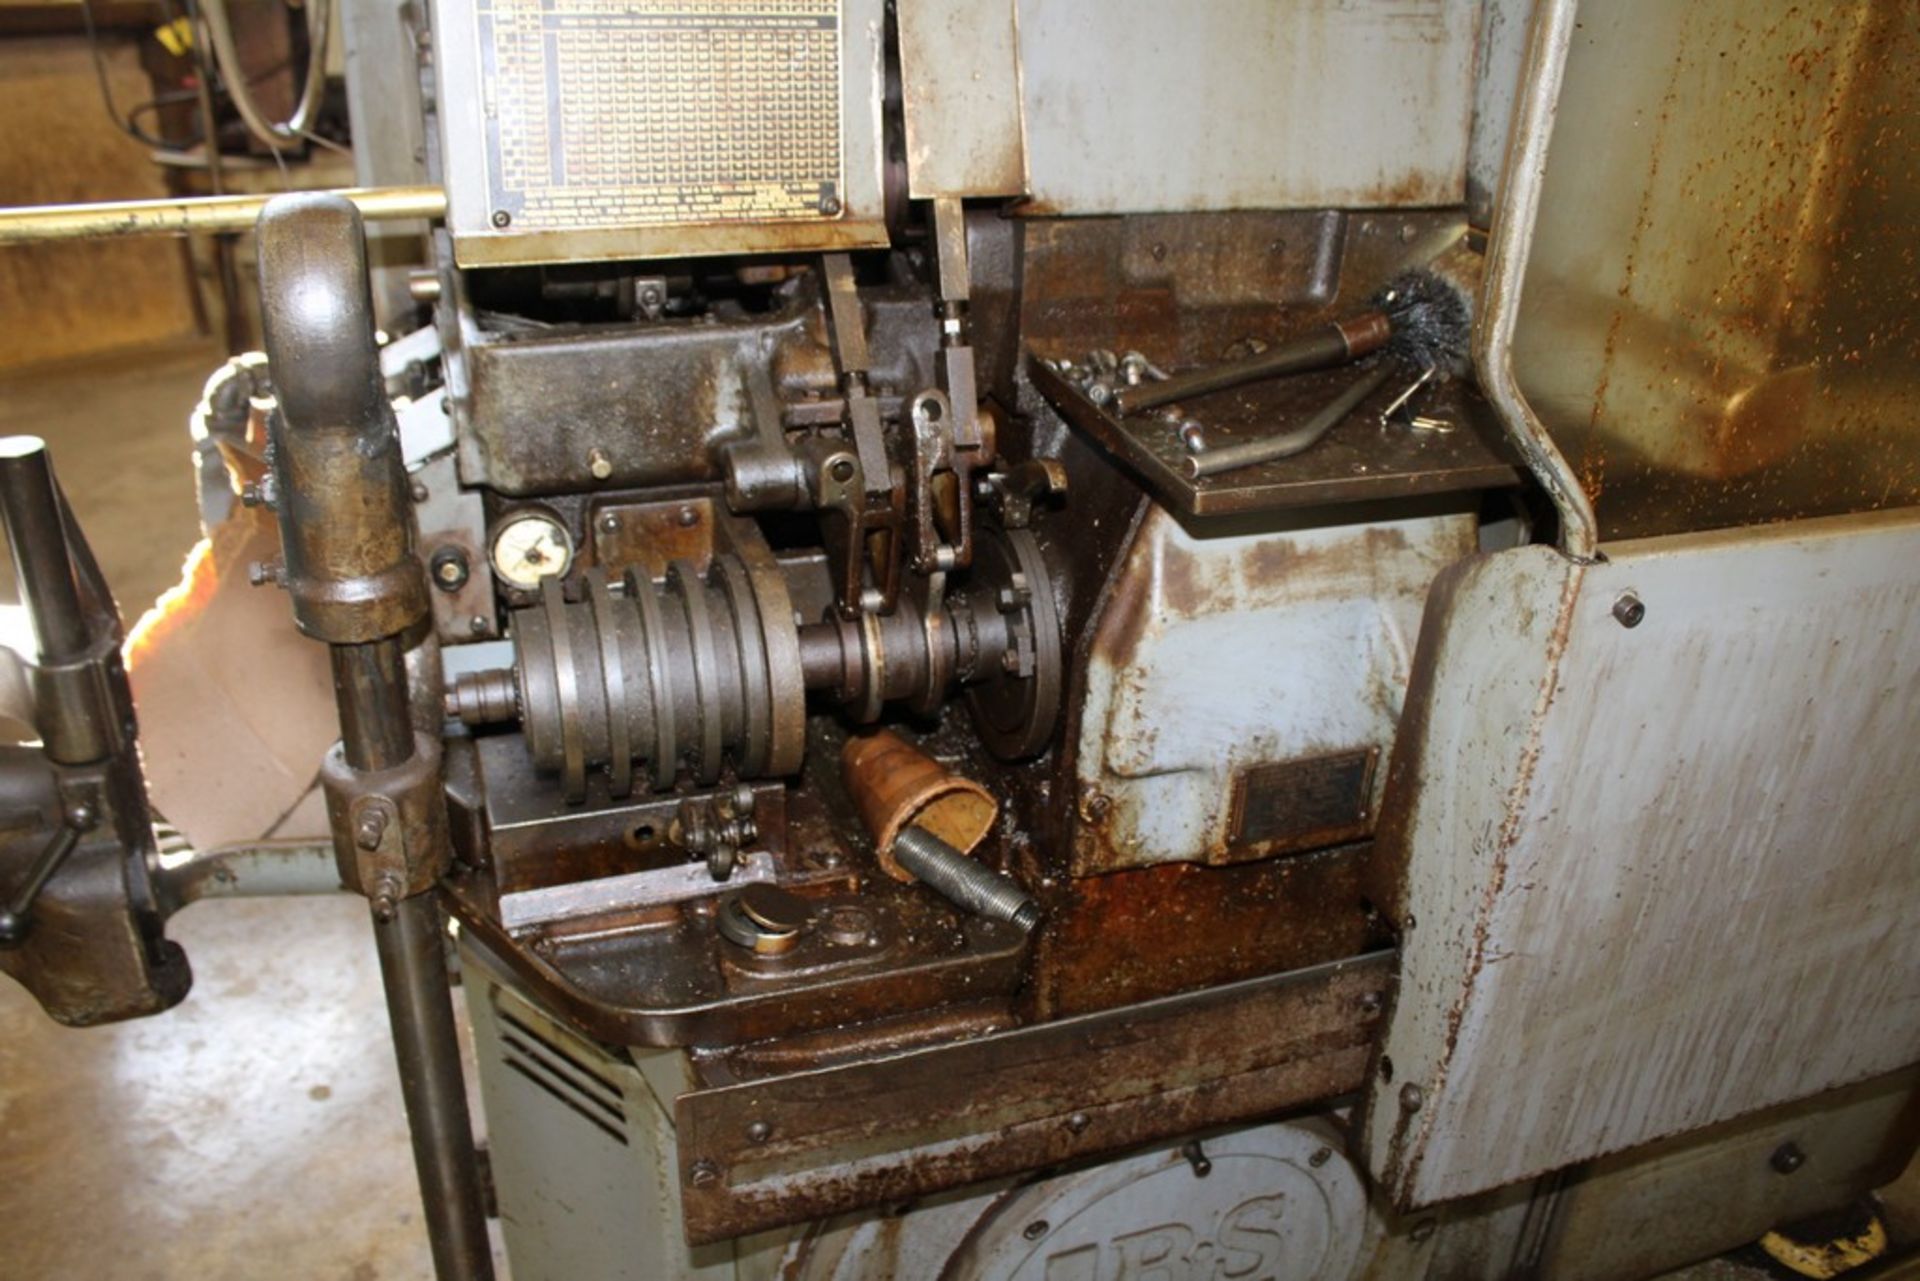 BROWN & SHARPE NO. 2 1-5/8" 4-SPEED AUTOMATIC SCREW MACHINE, S/N 542-2-6217, WITH VERTICAL SLIDE - Image 4 of 6